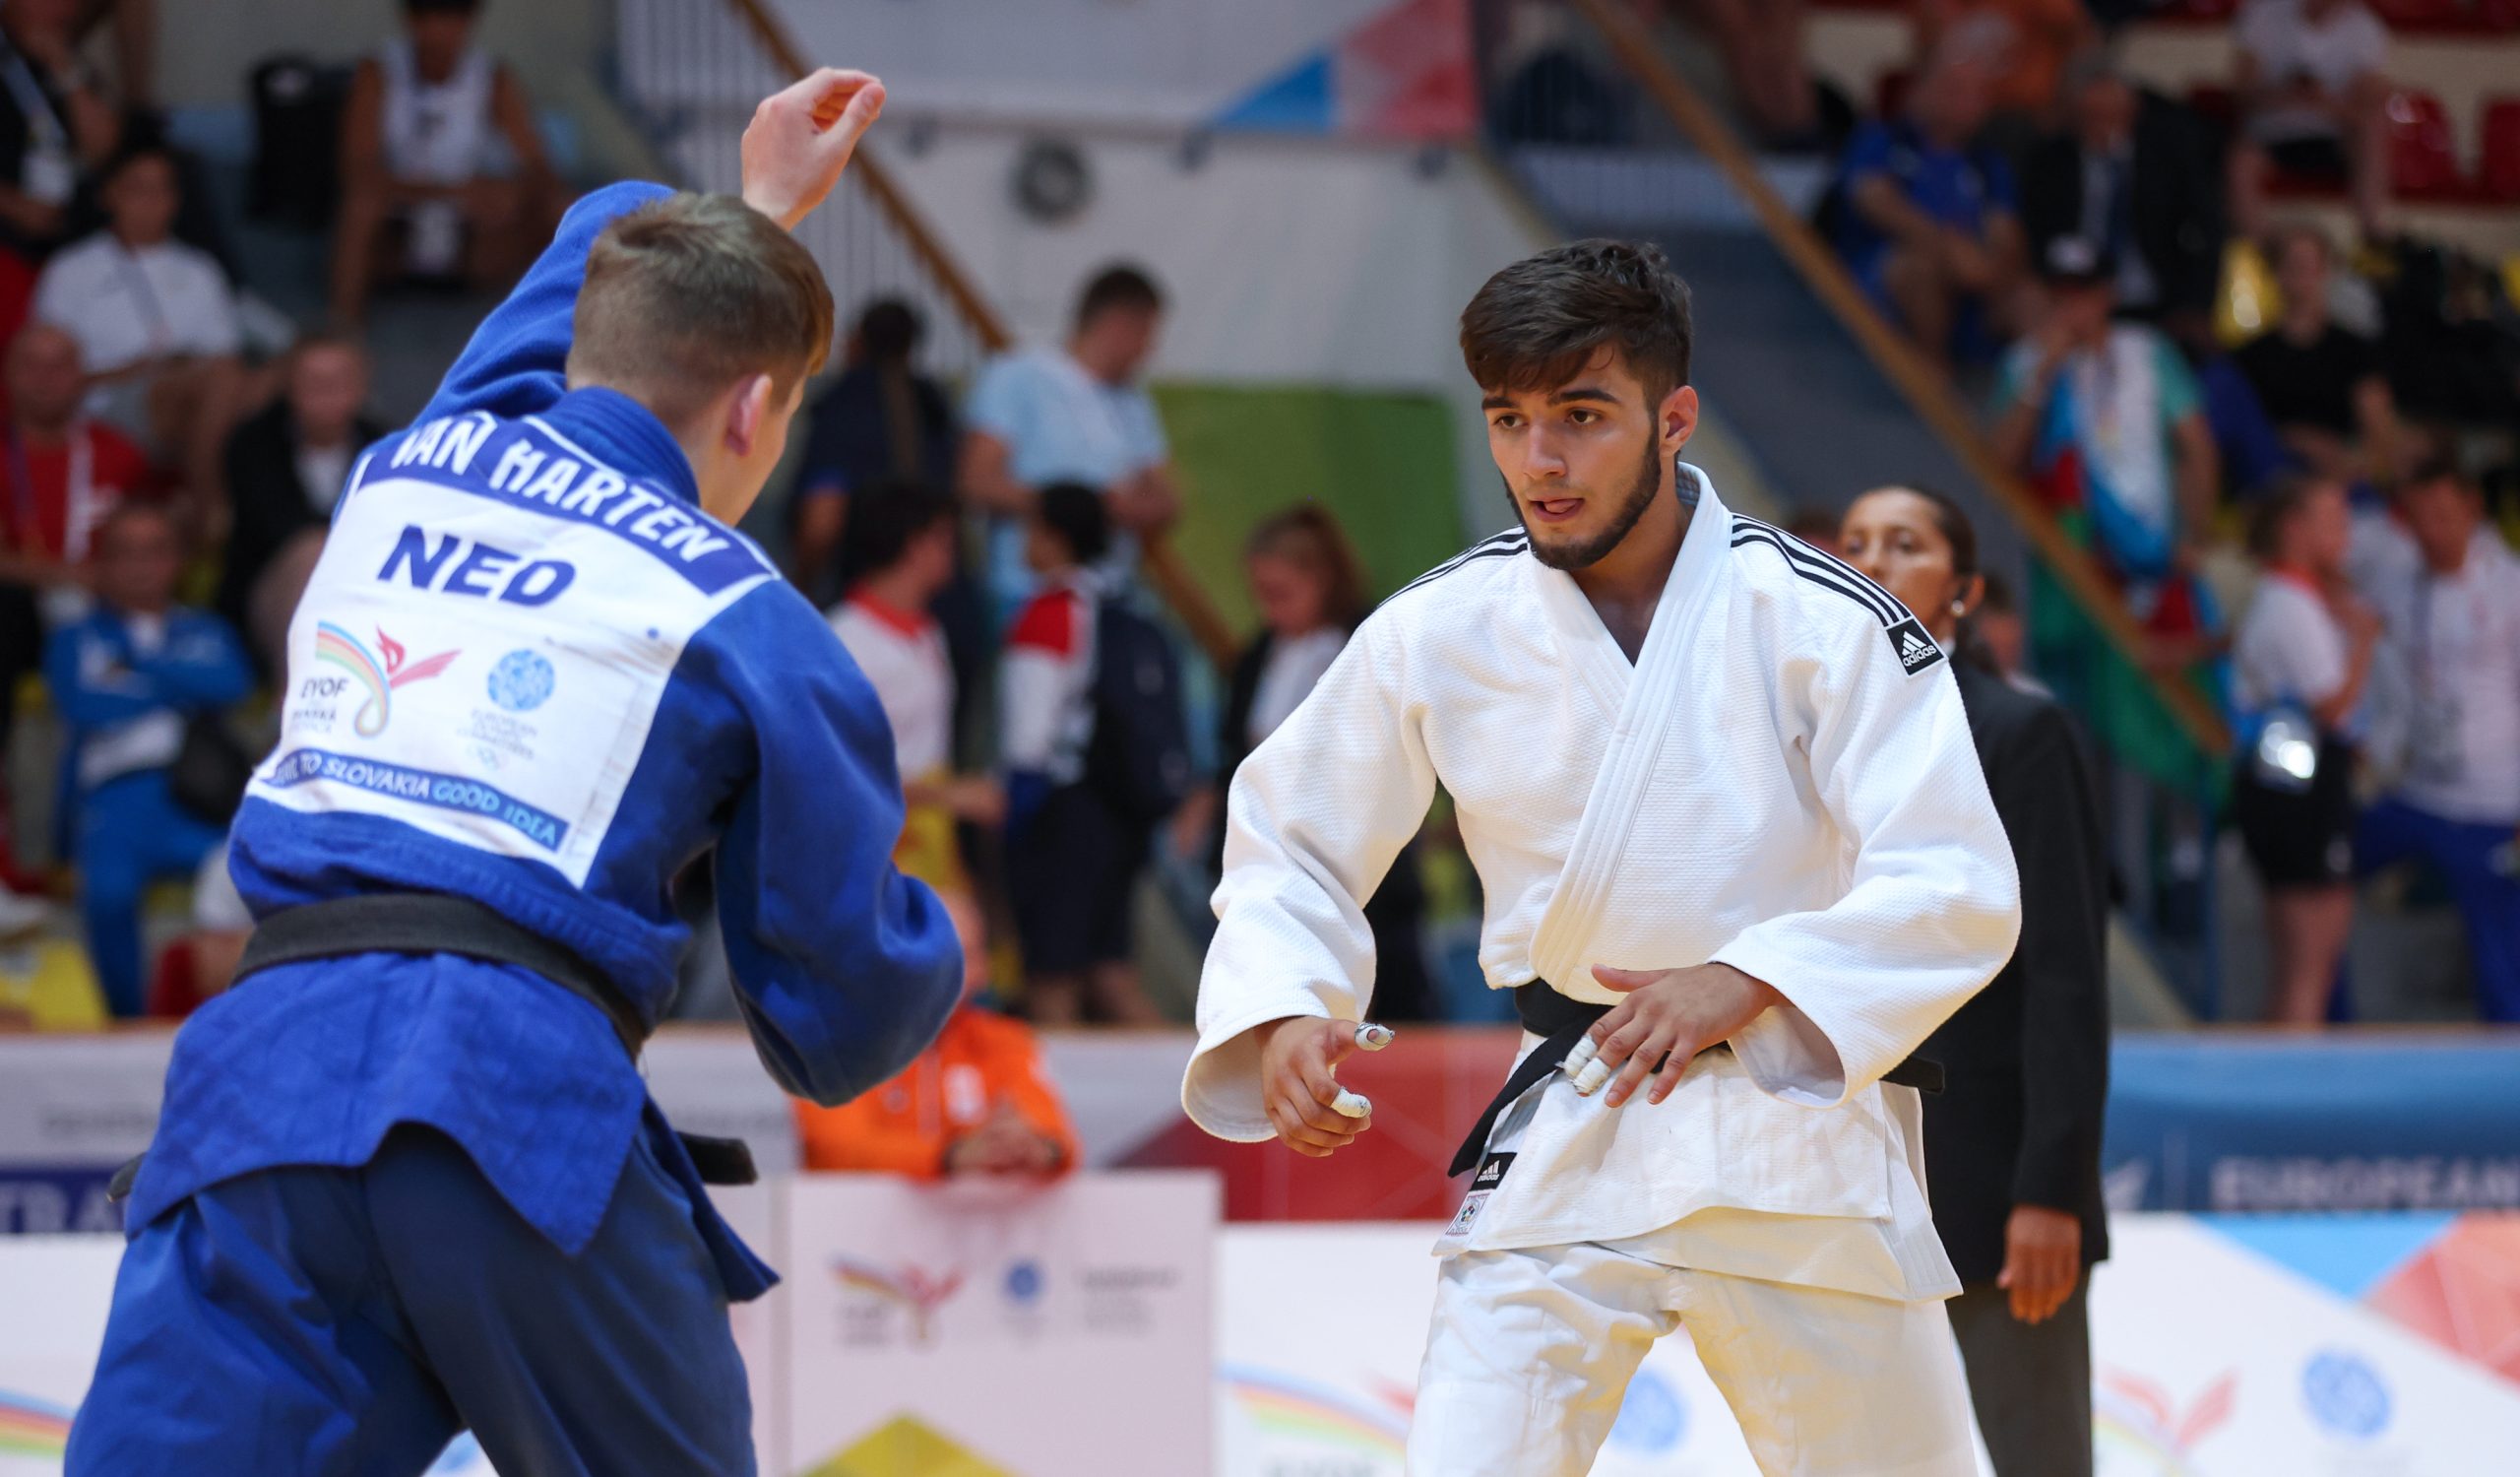 SUCCESSFUL FIRST DAY OF JUDO IN EUROPEAN YOUTH OLYMPIC FESTIVAL 2022